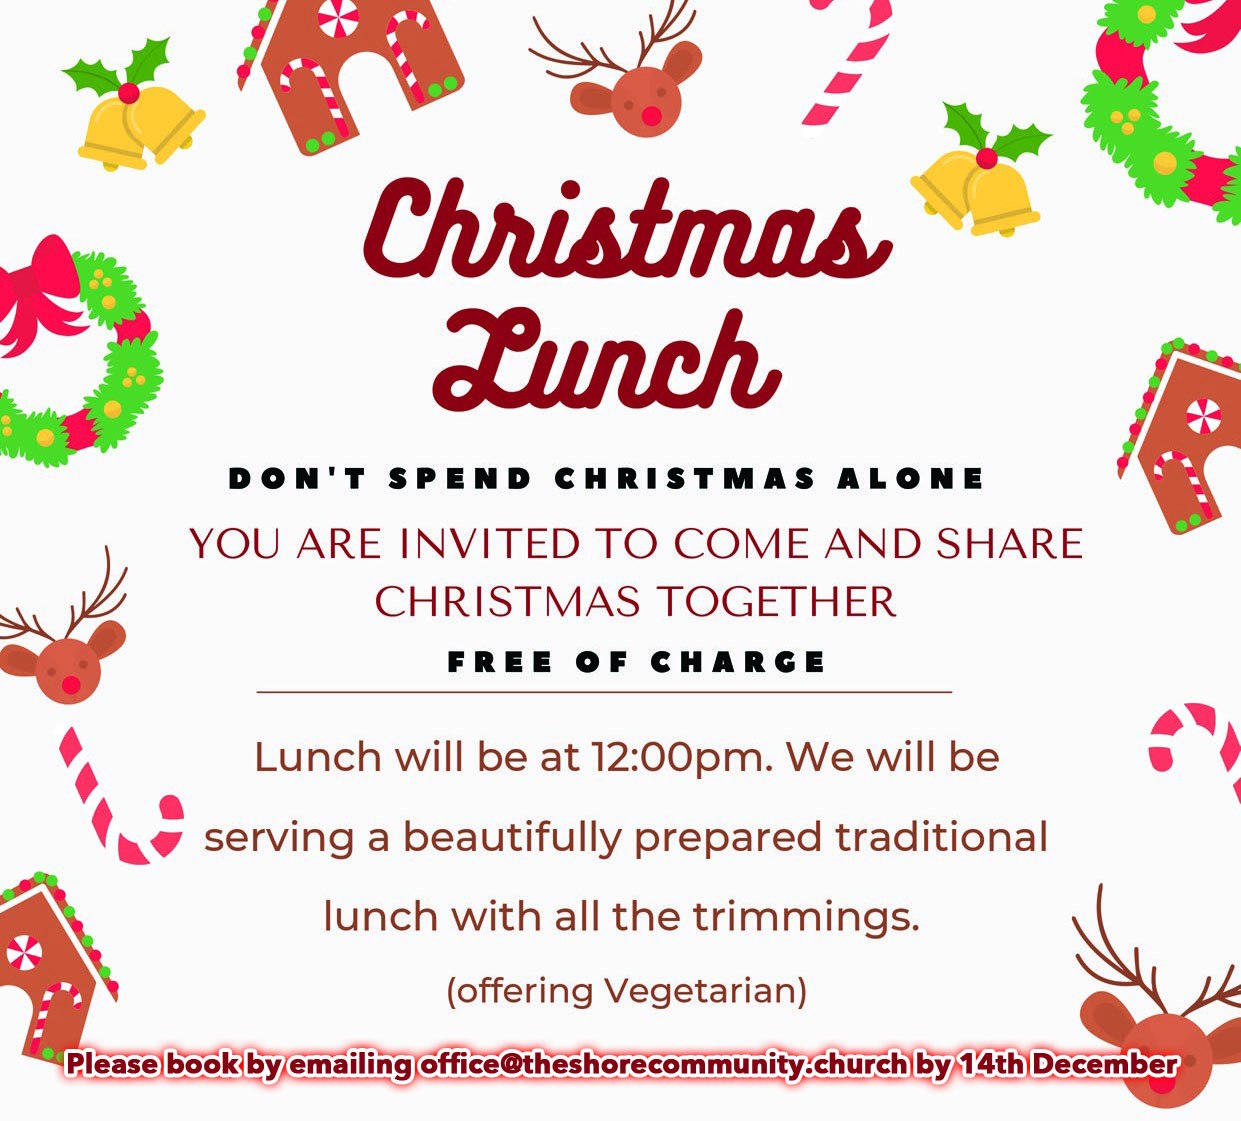 Christmas lunch advertisement image